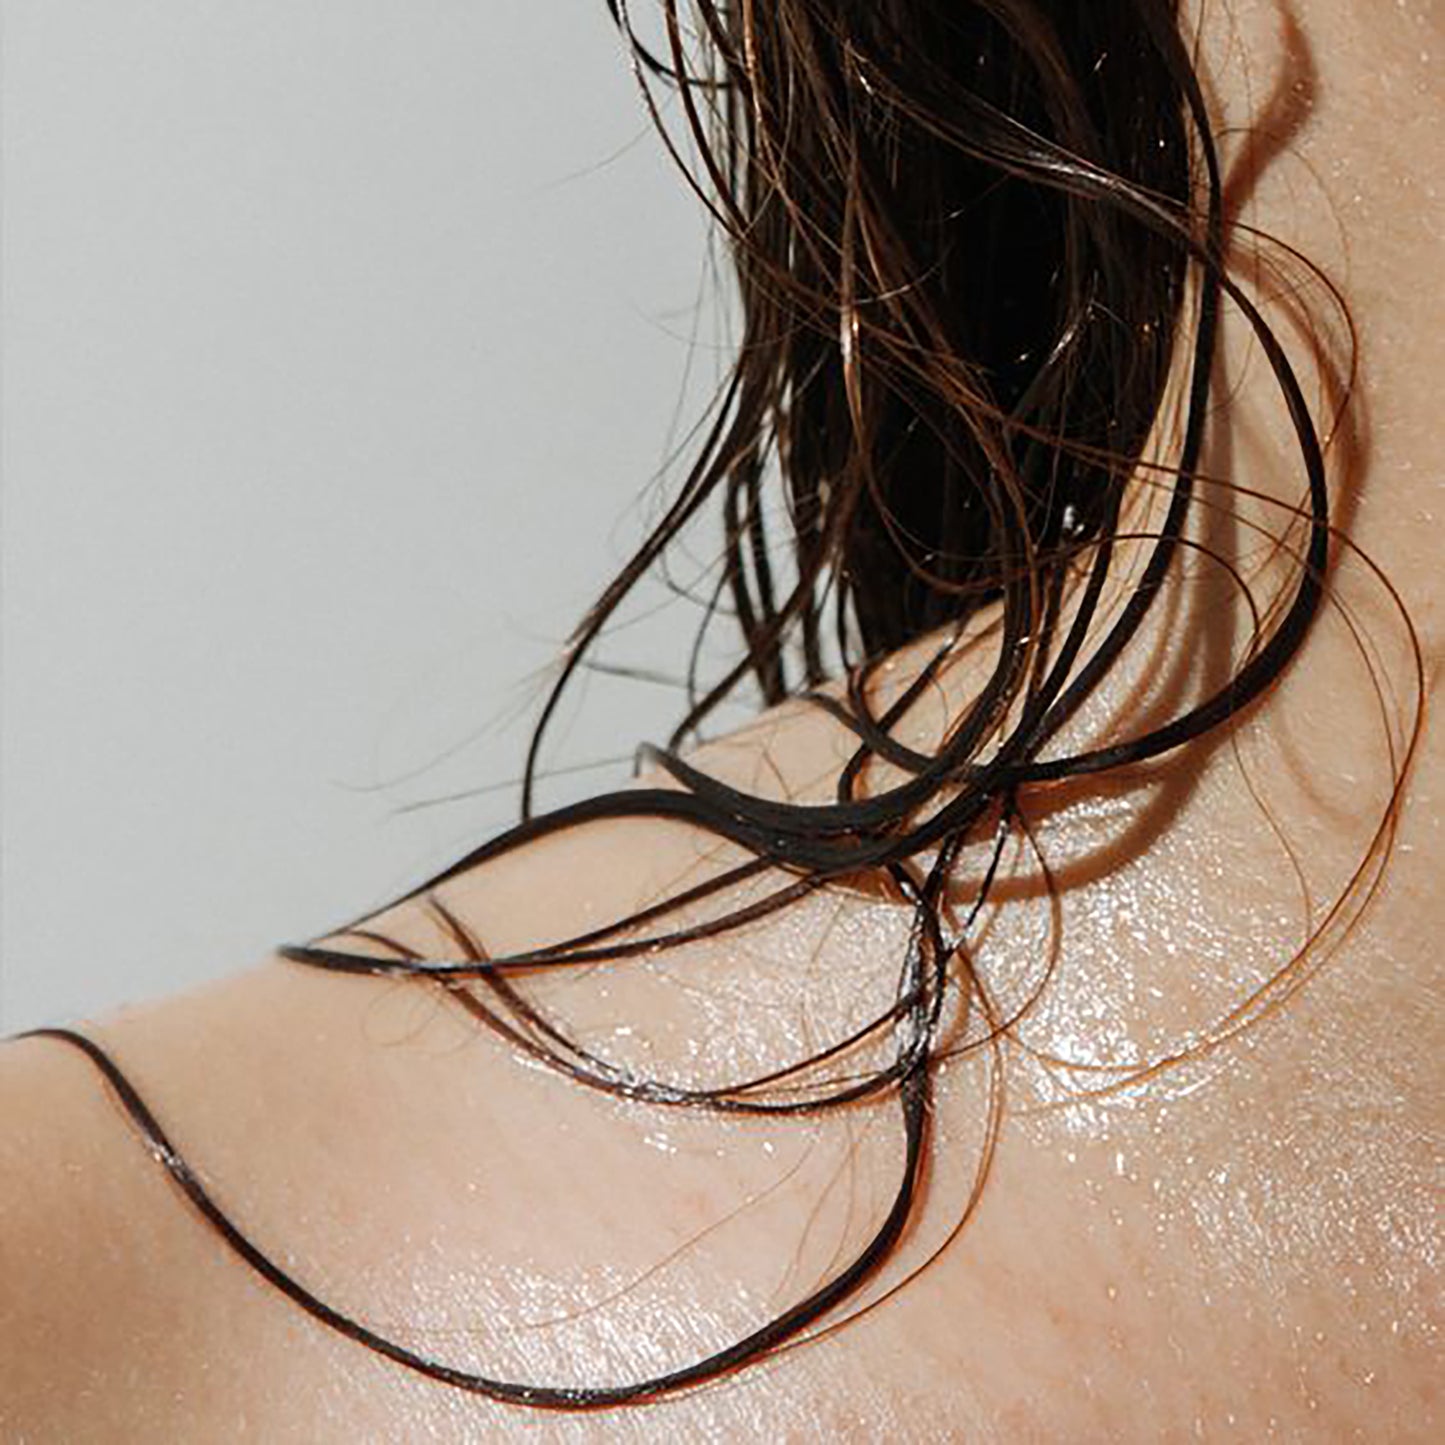 mood image showing a woman's skin